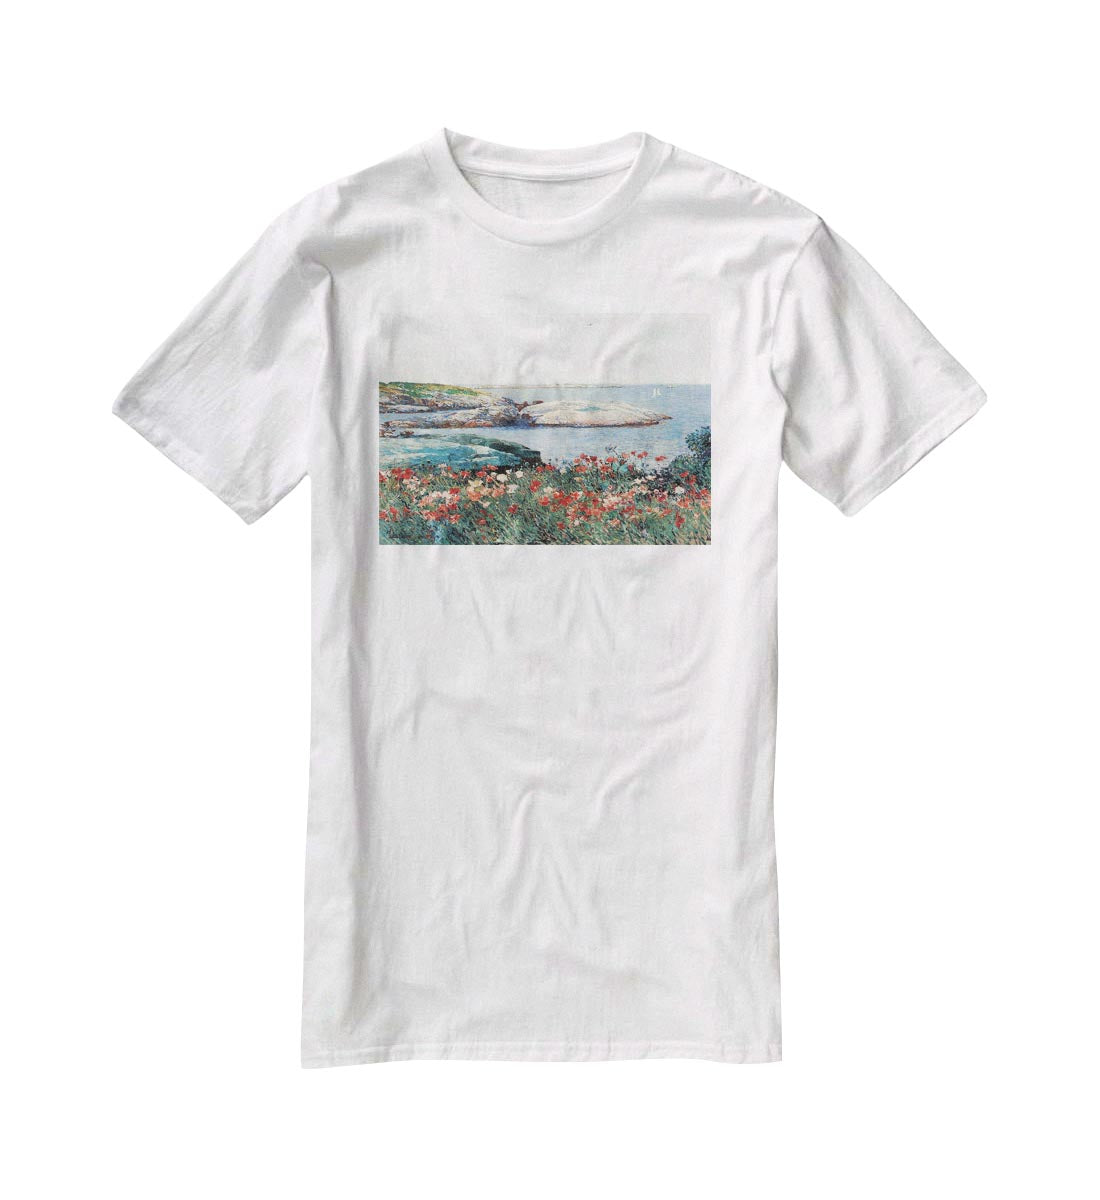 Poppies Isles of Shoals 1 by Hassam T-Shirt - Canvas Art Rocks - 5